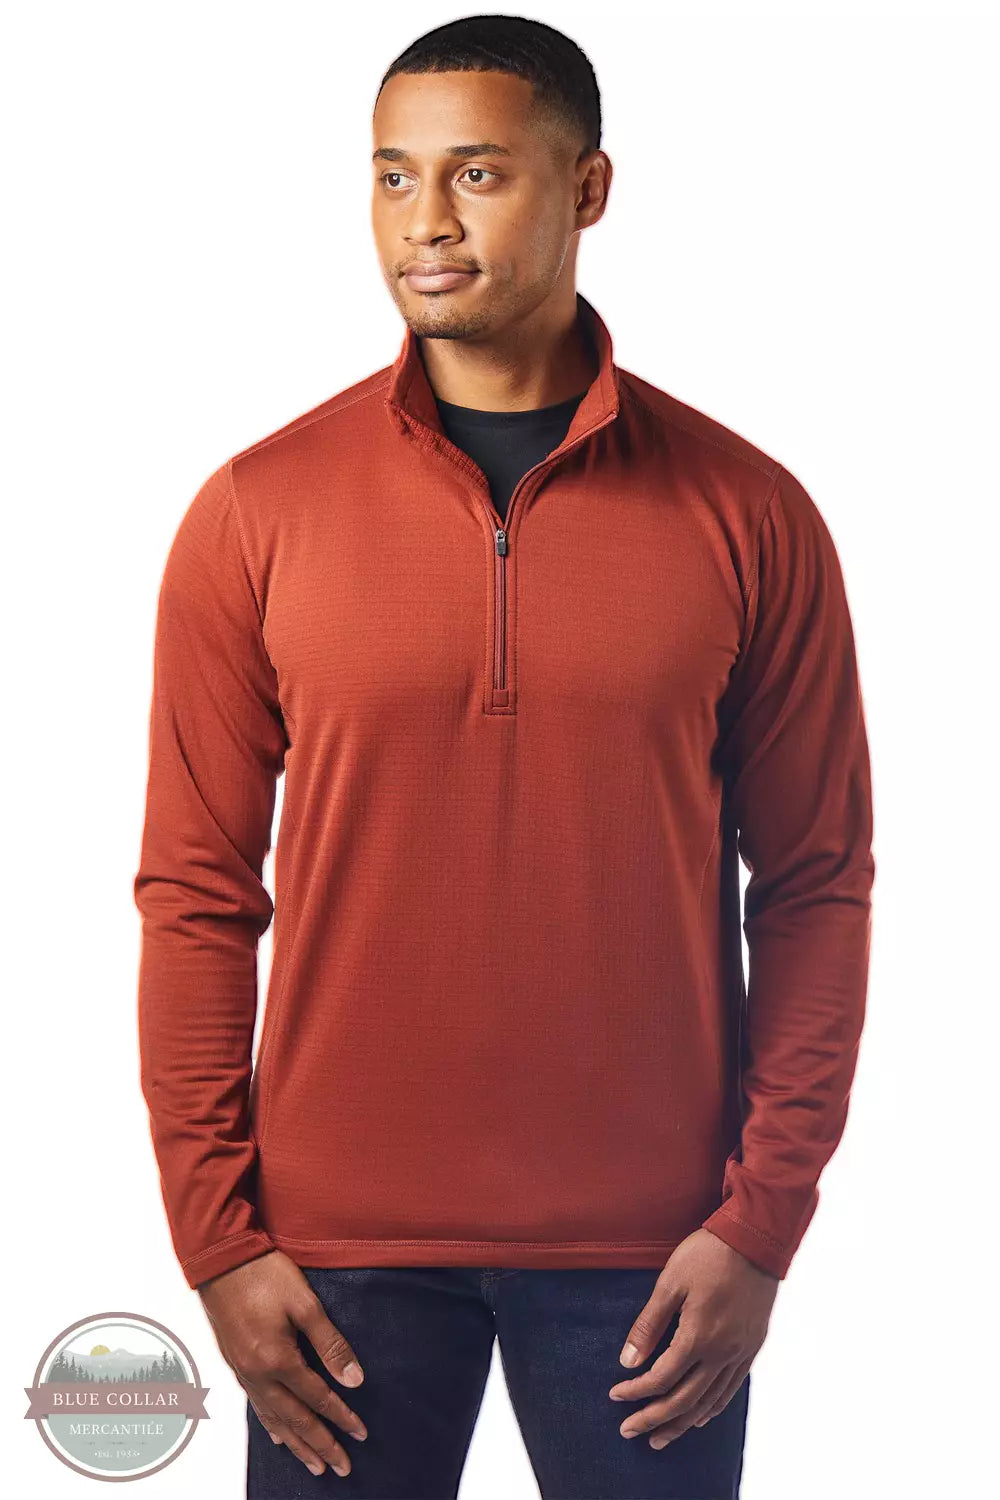 Landway 2423 Radiance Thermal Dry Performance Fleece Pullover Burnt Orange Front View